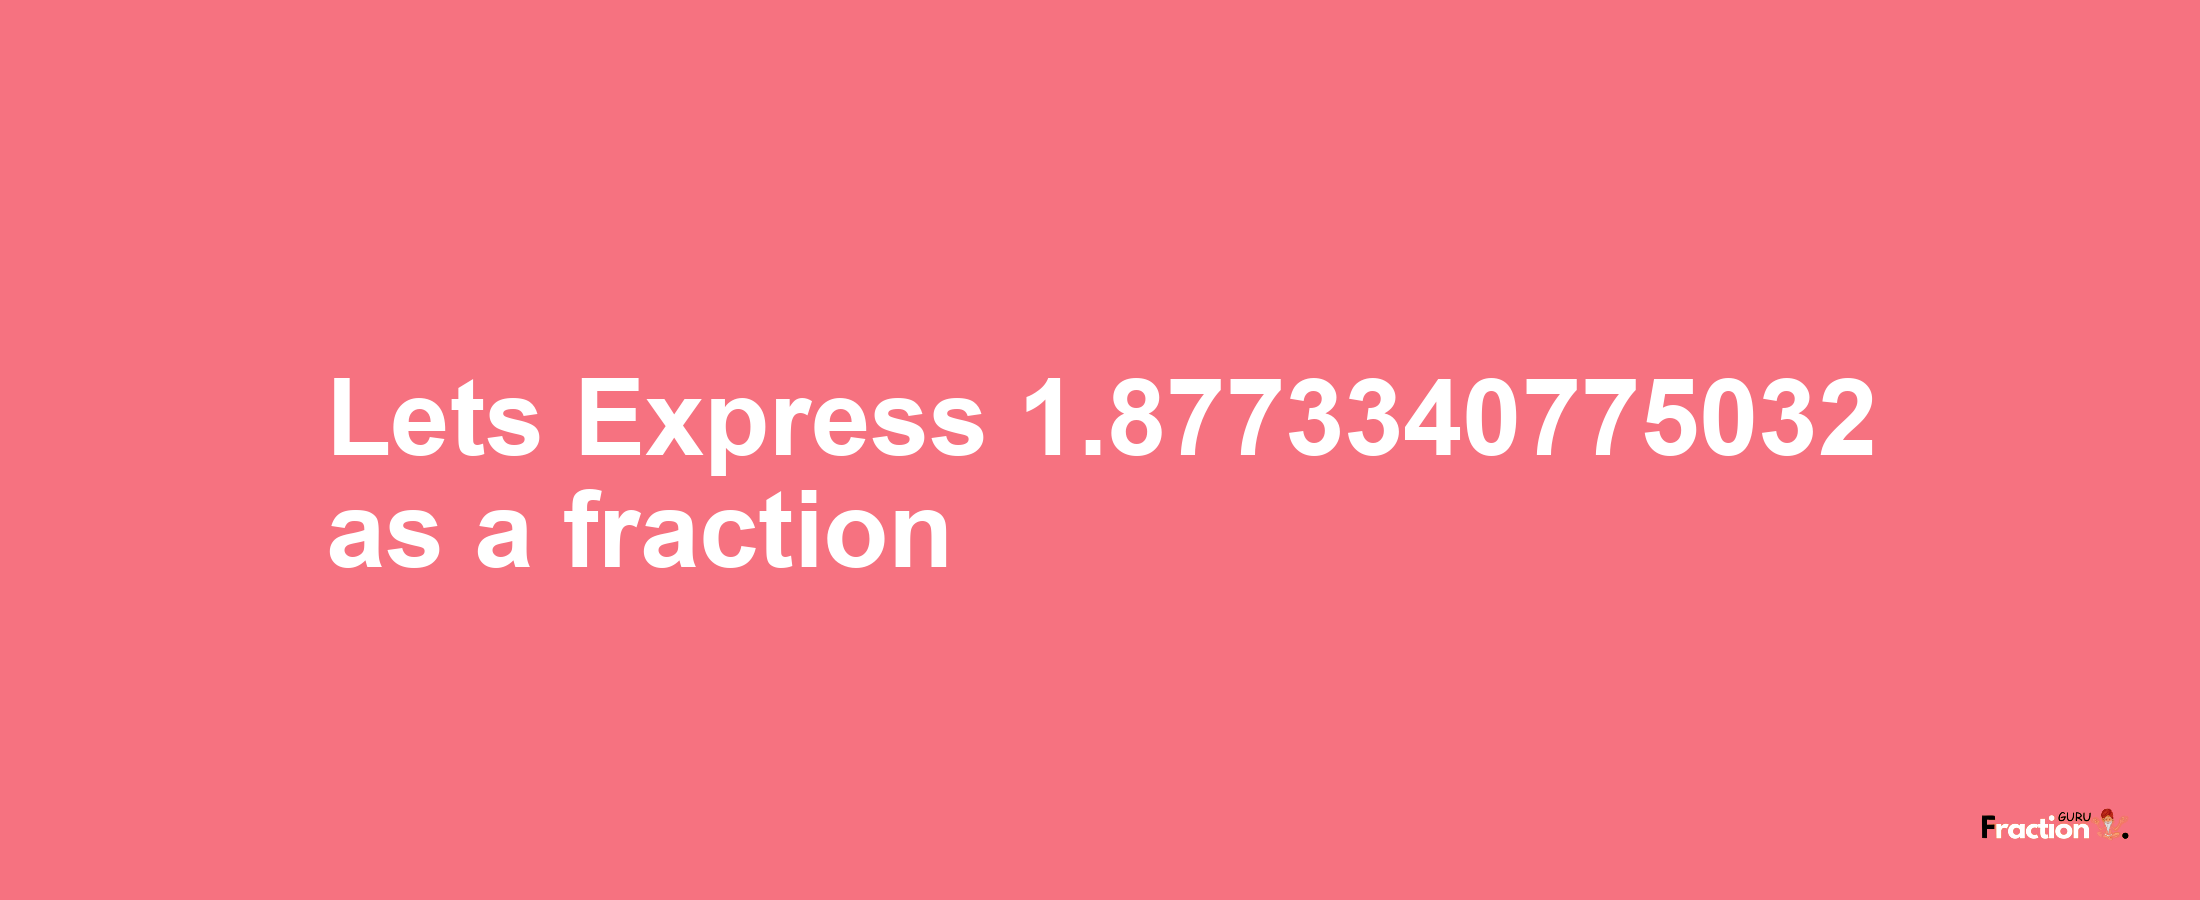 Lets Express 1.8773340775032 as afraction